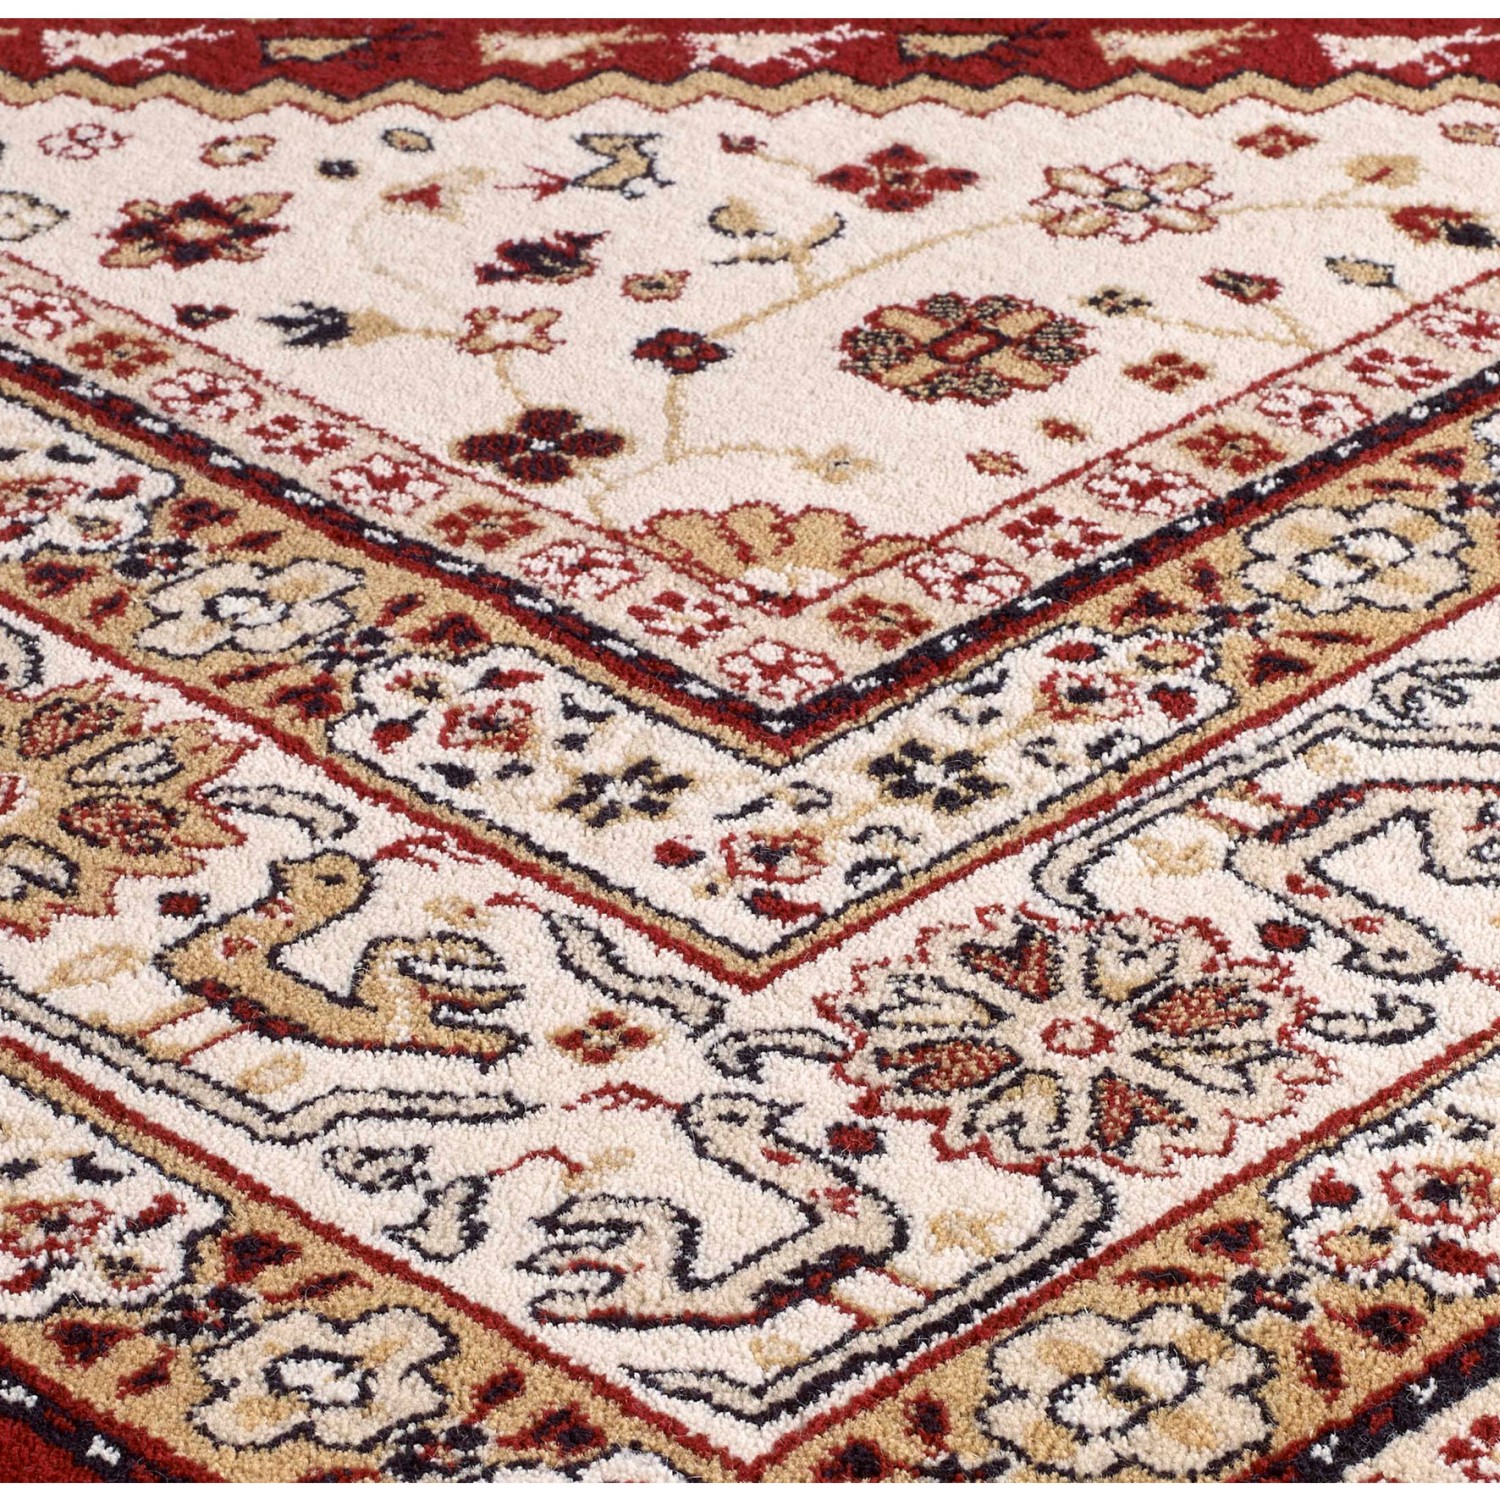 Royal Classic Traditional Rug - 93R Red Gold